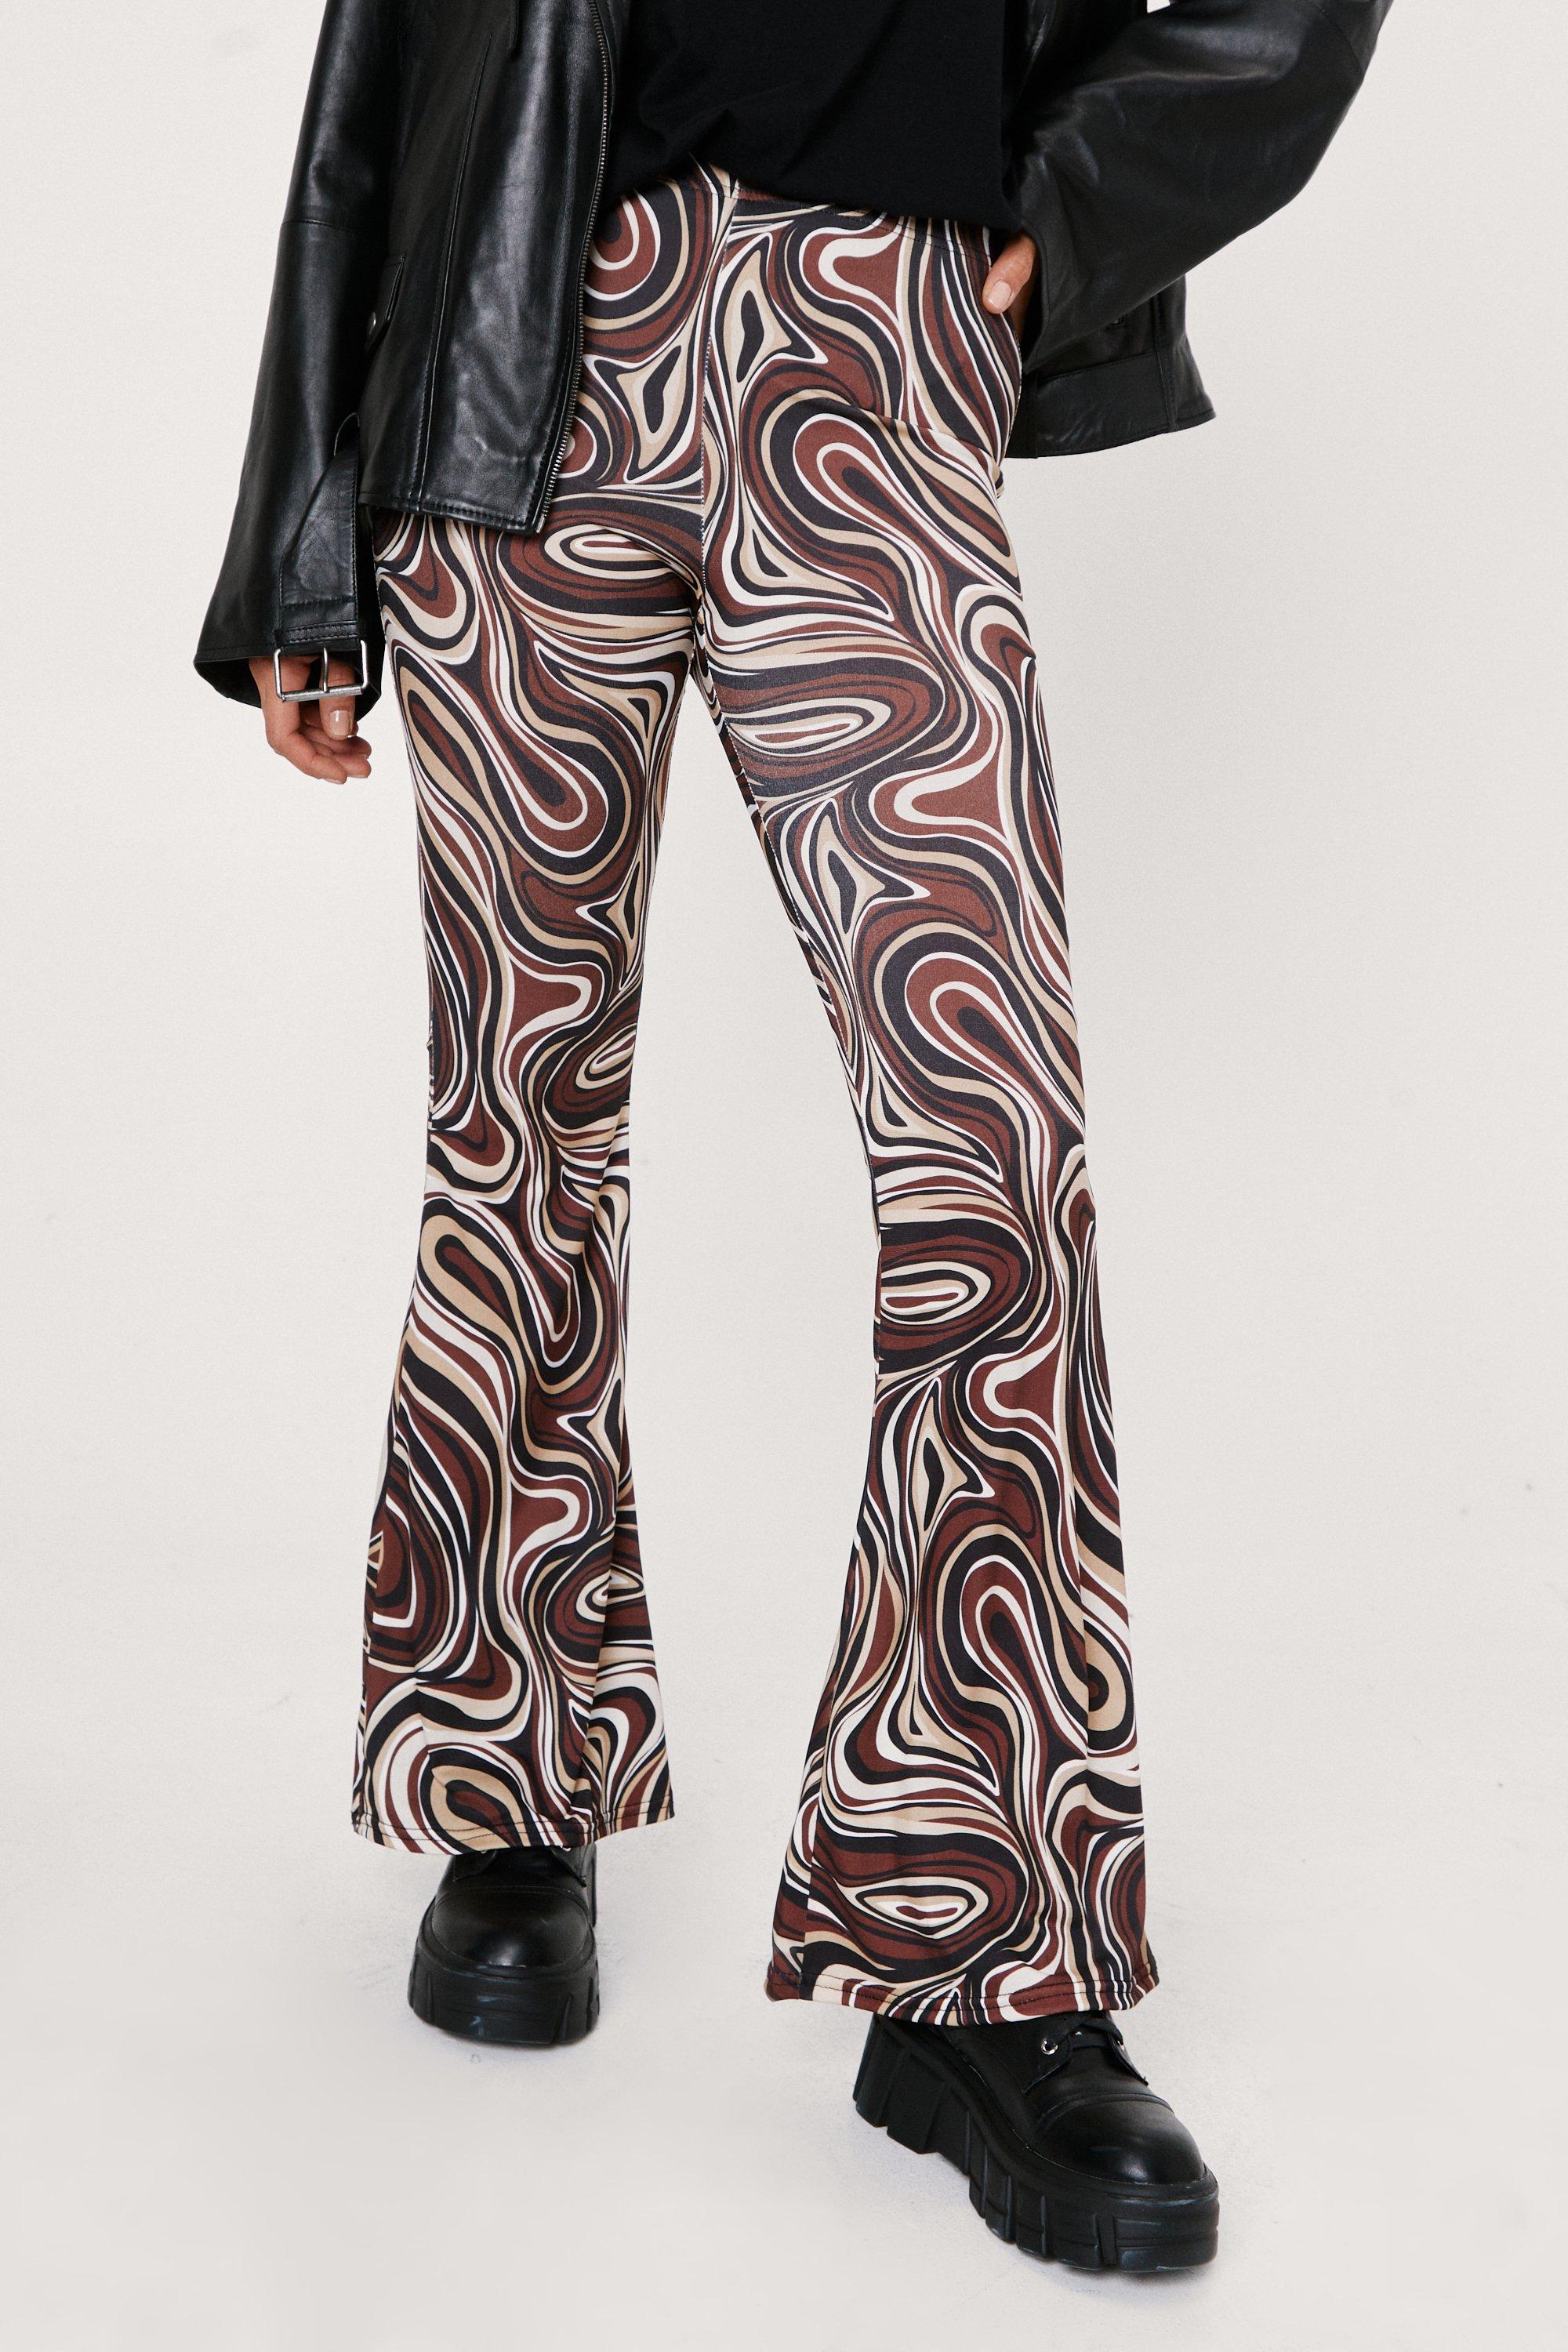 Urban Threads kick flare pants in 70s swirl print (part of a set)